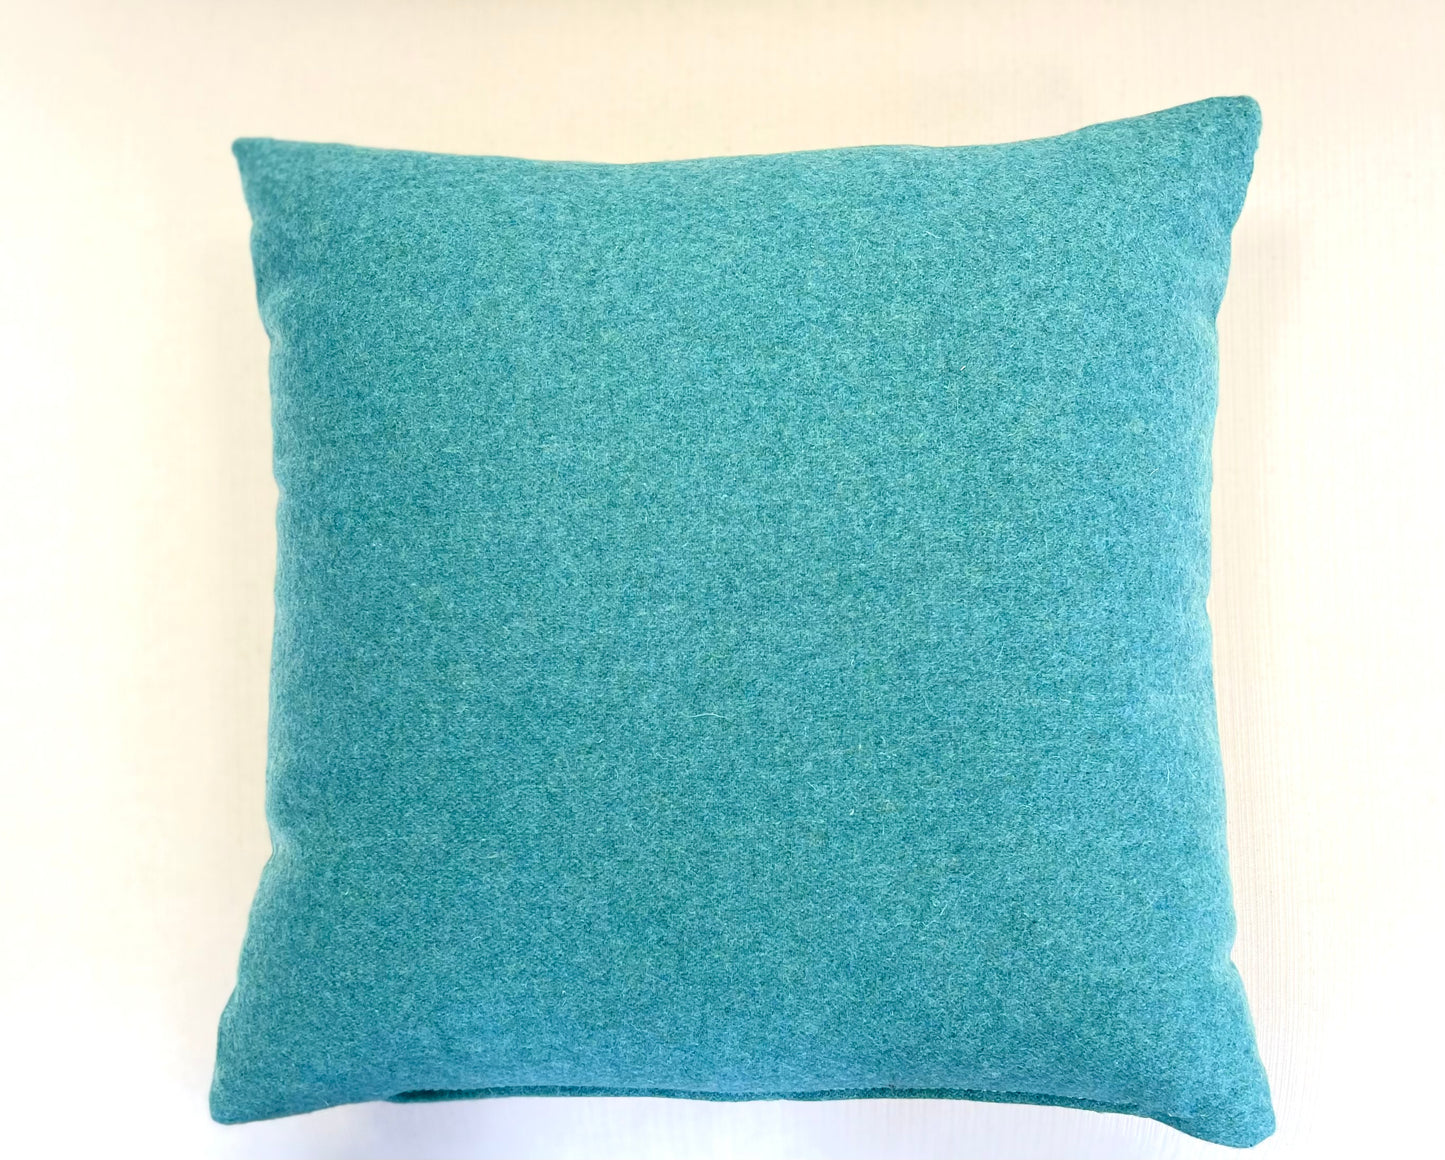 Wool and Cotton, Knit Pillow